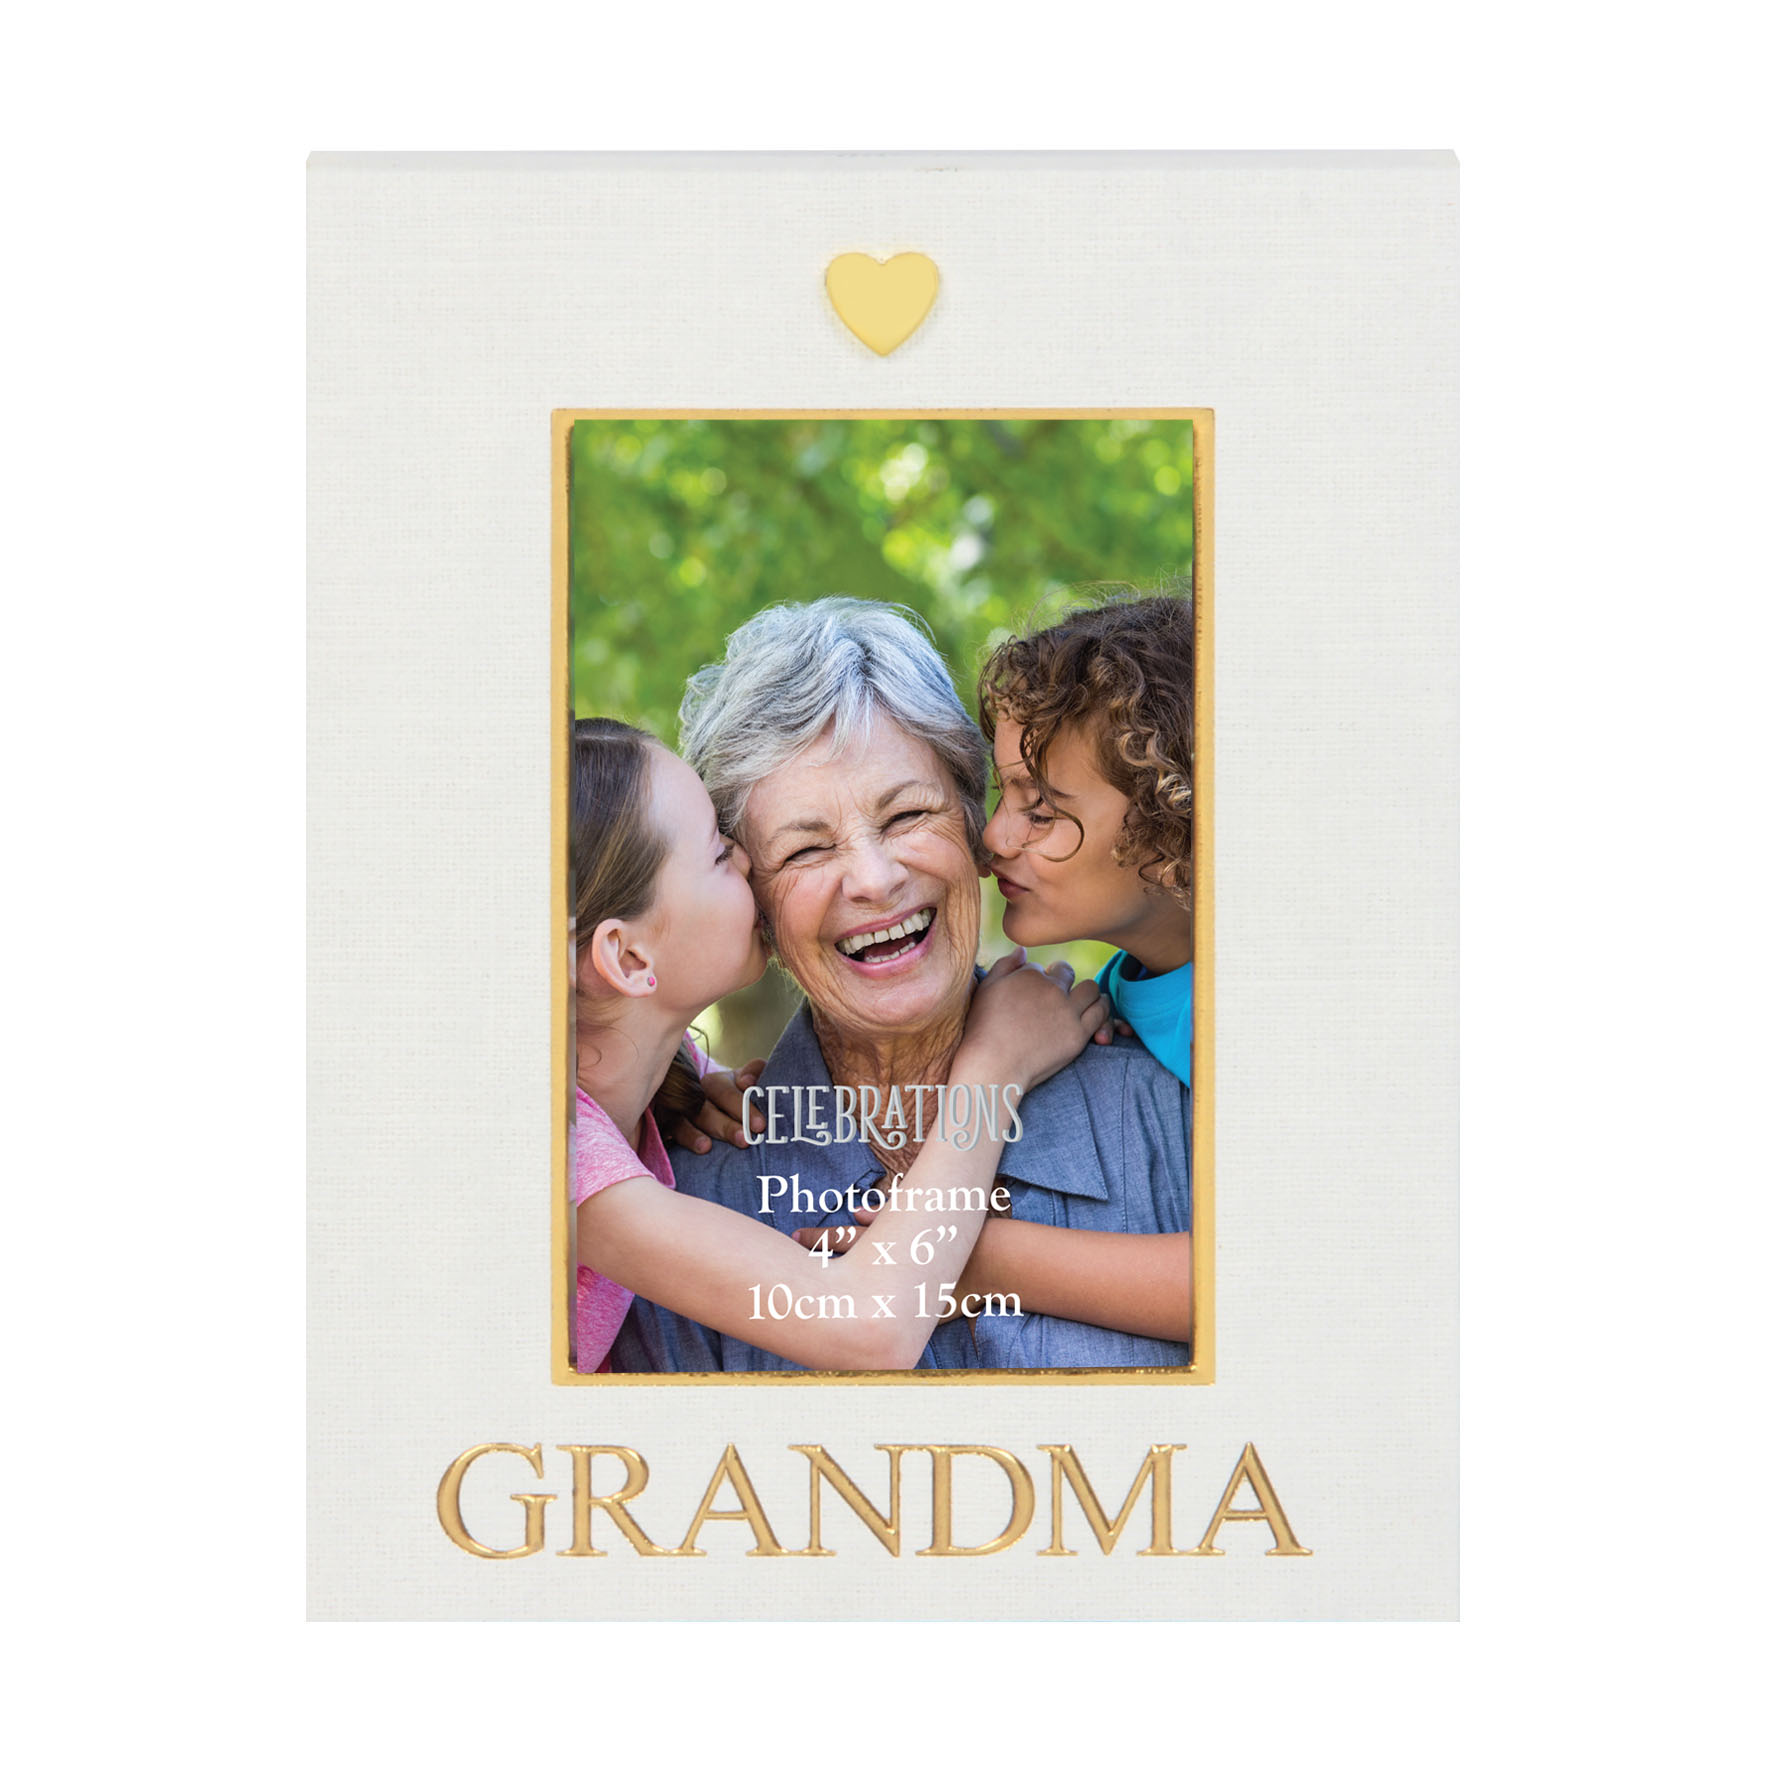 Gold and Cream Photo Frame for Grandma by Widdop Gifts